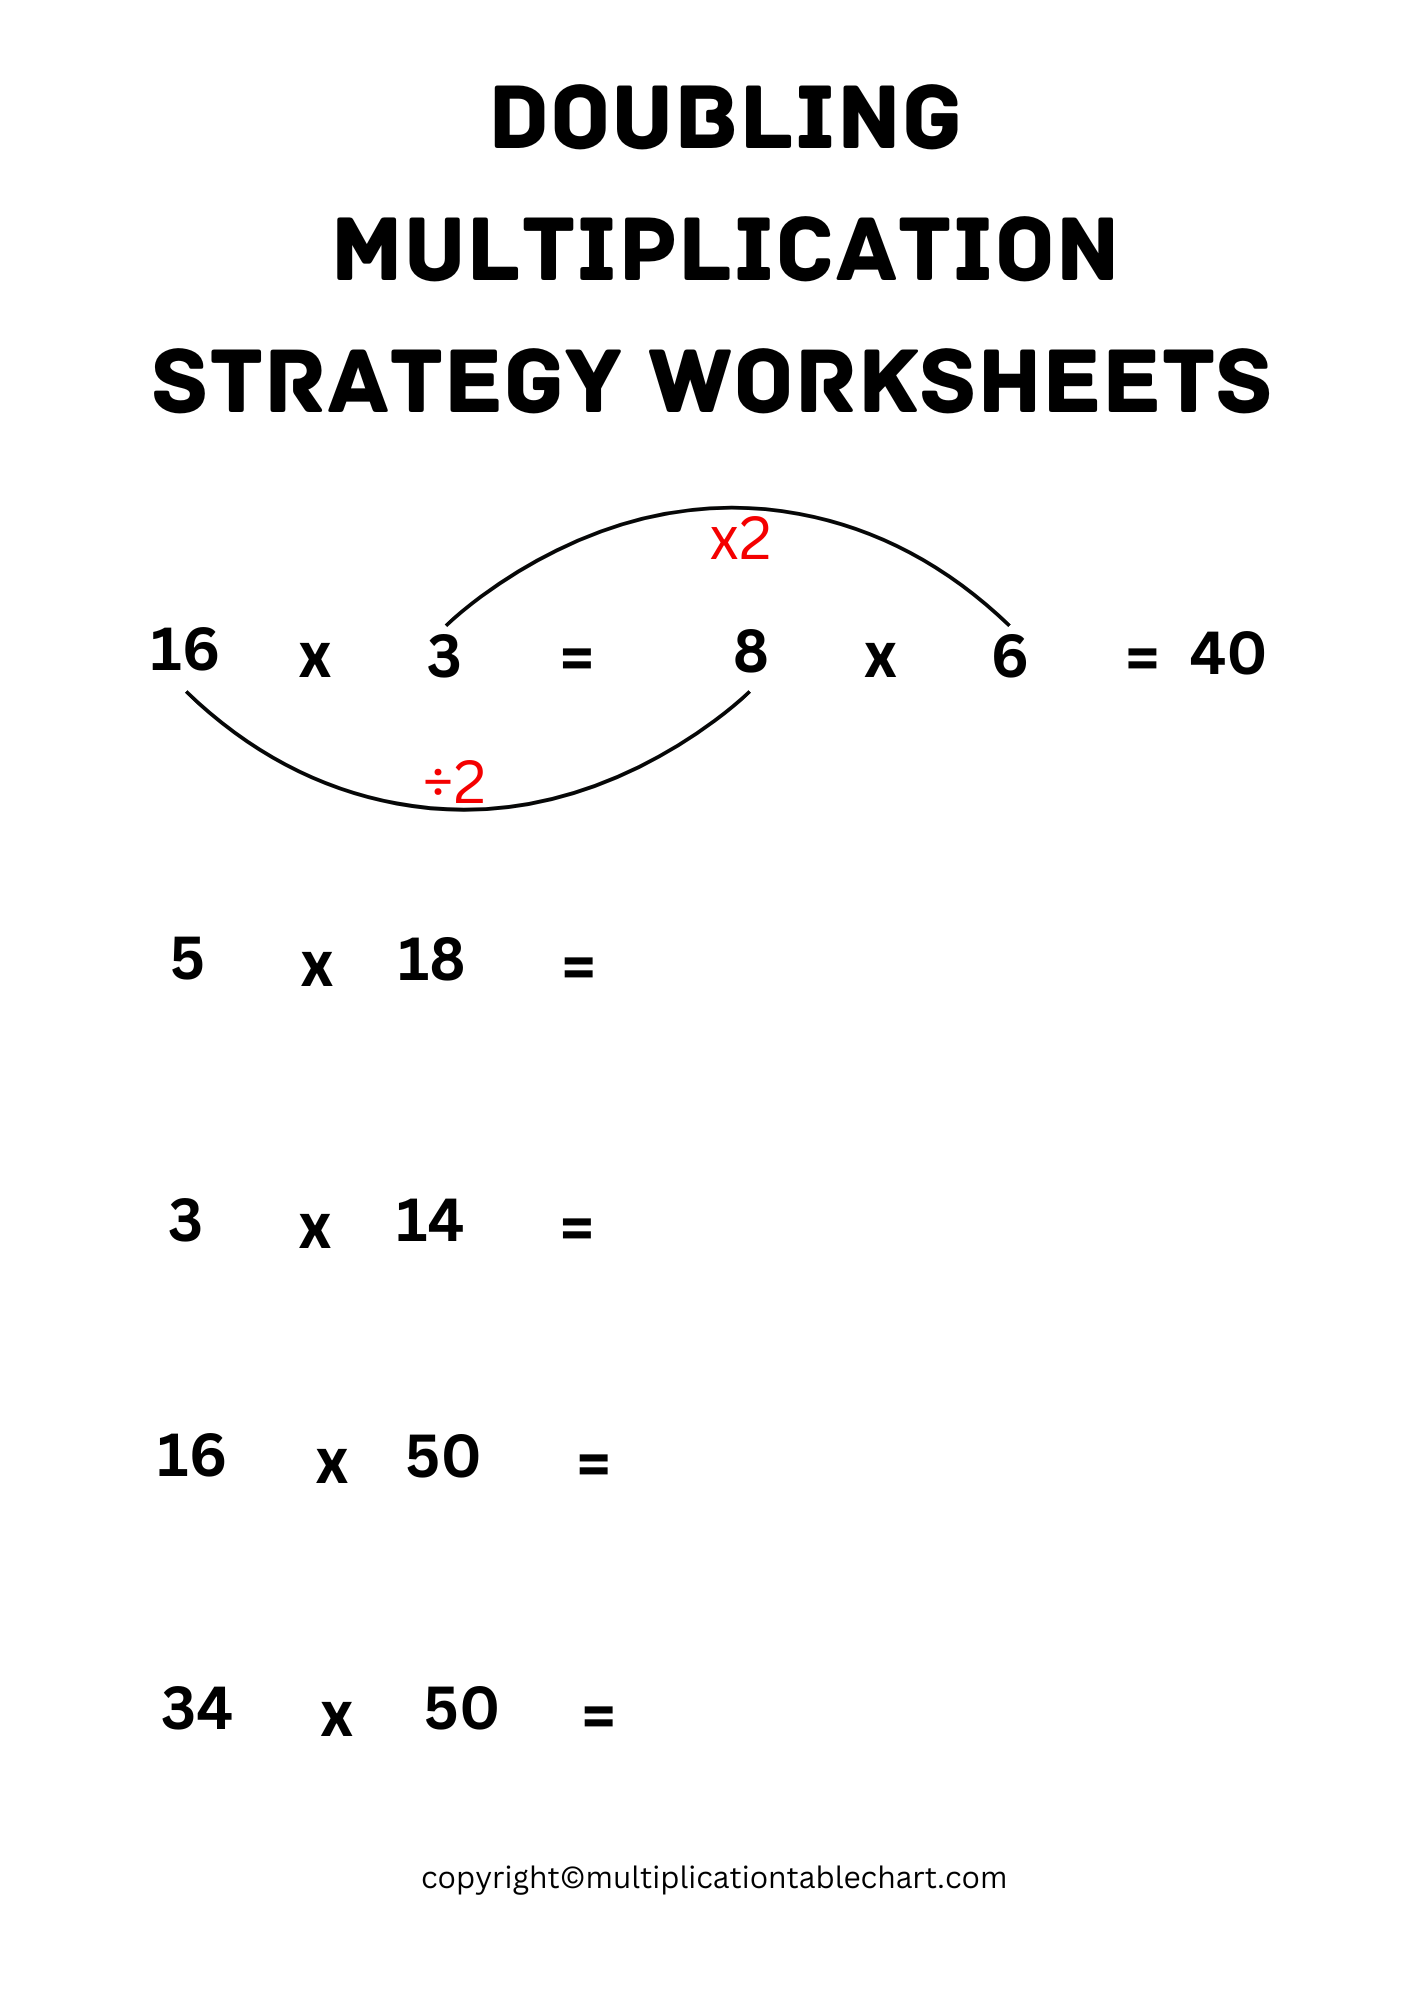 doubling-multiplication-strategy-worksheets-printable-pdf